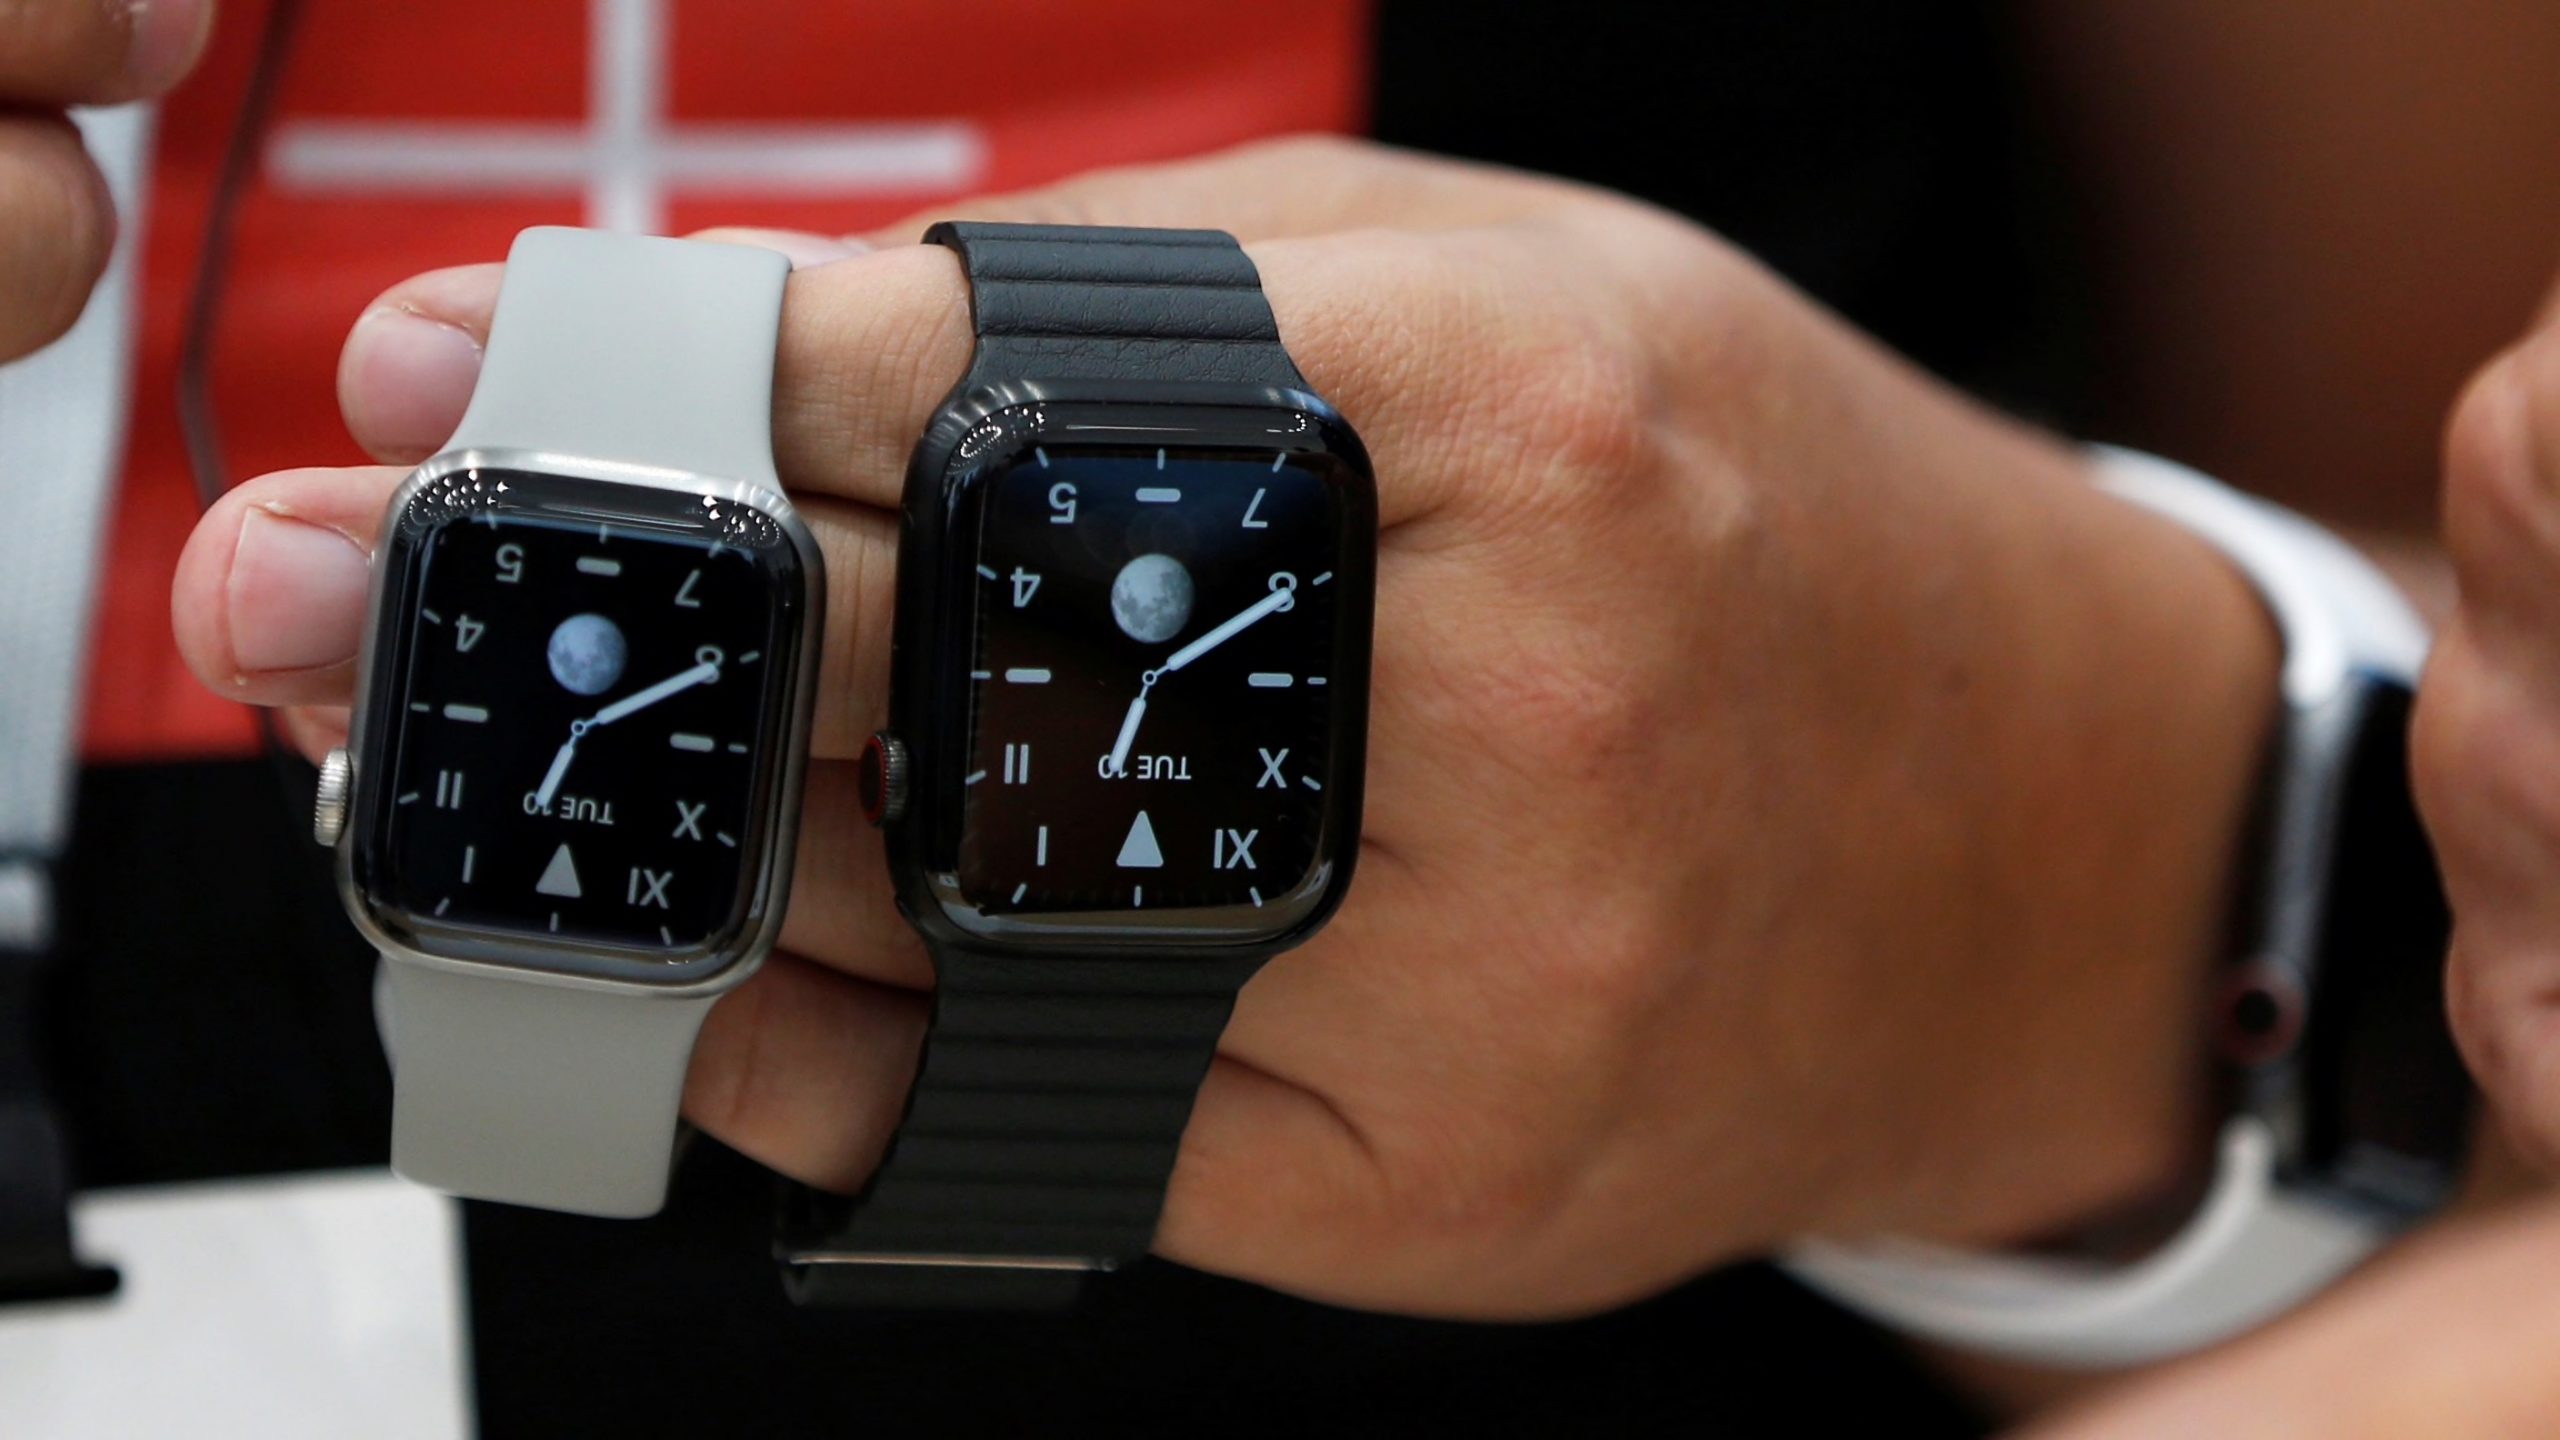 70% of Apple Watches buyers have never had one before